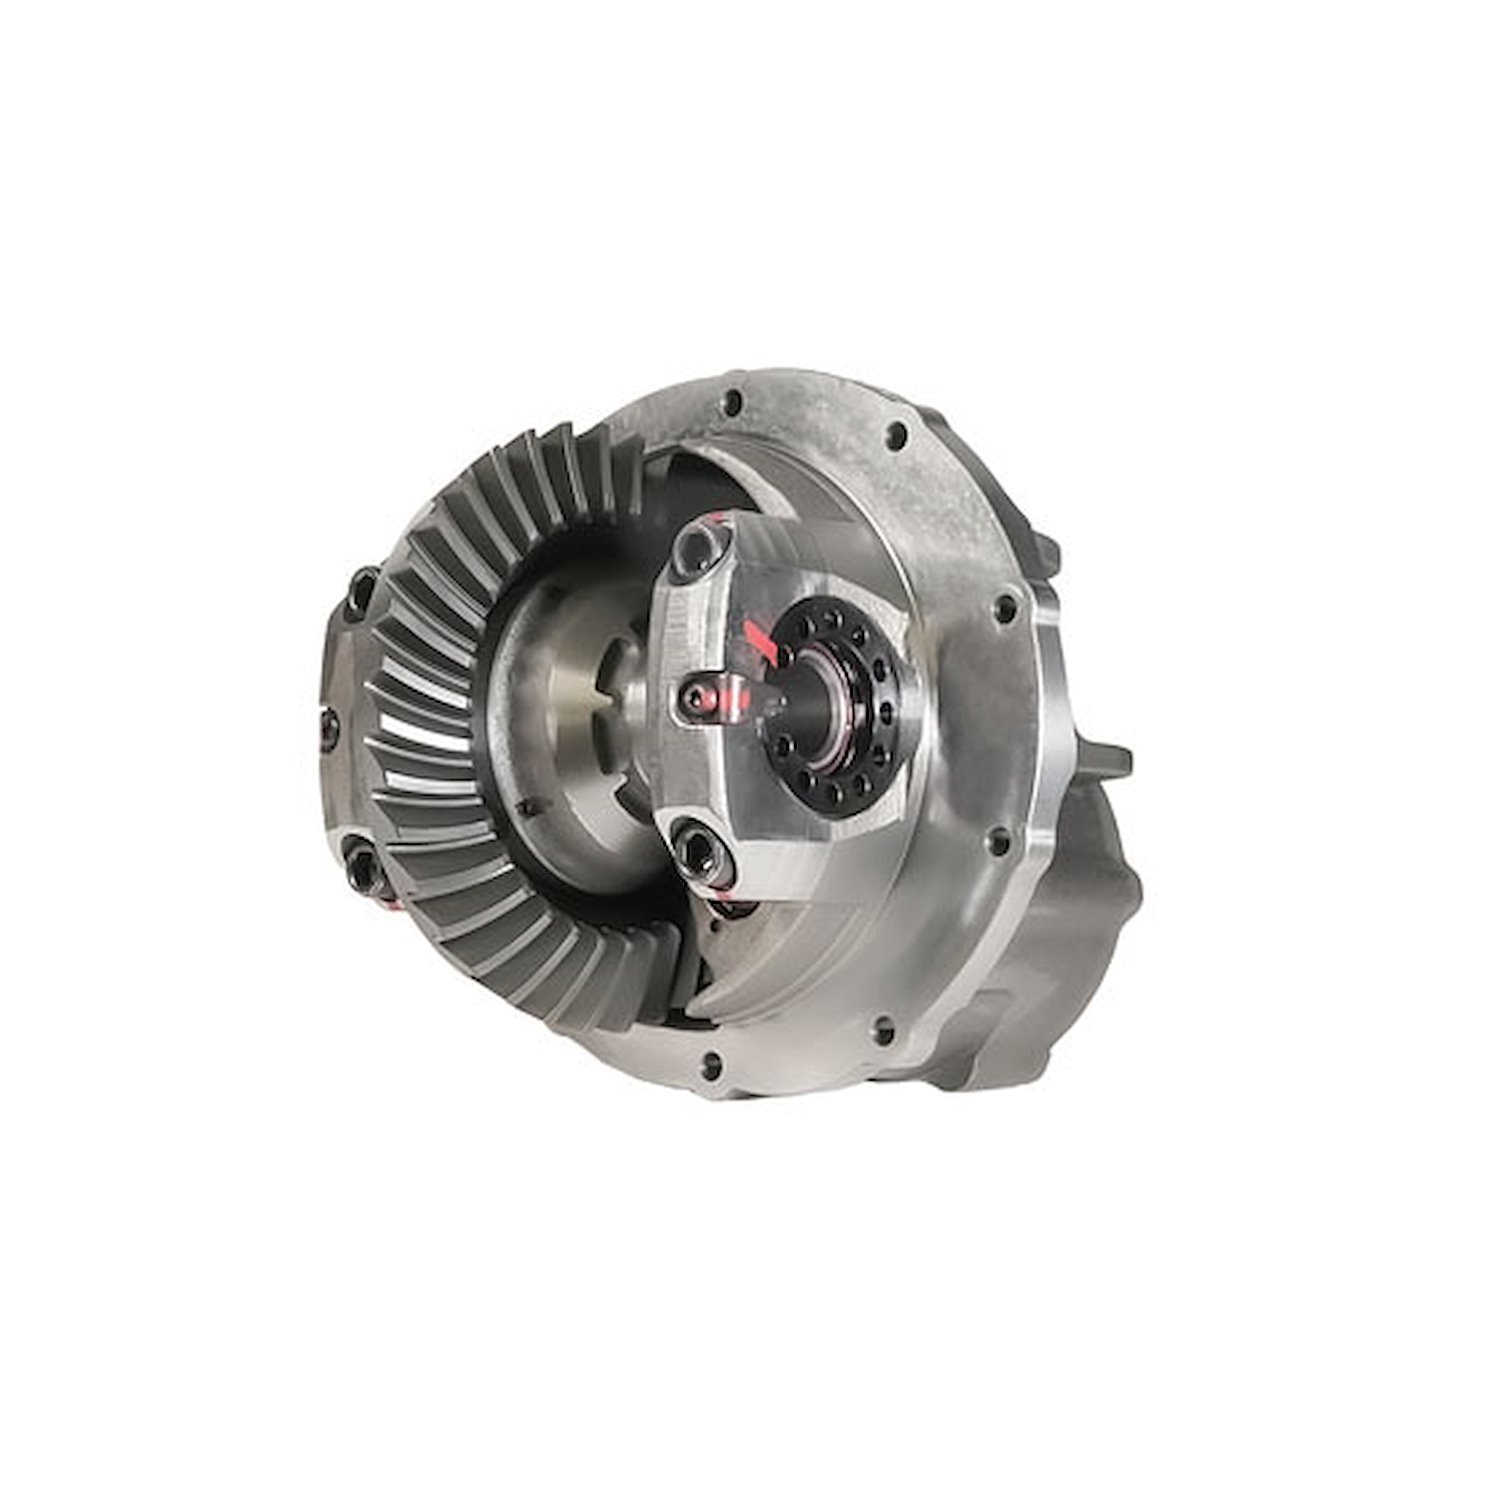 Dropout Assembly For Ford 9 in. Differential, 28 Spline, 4.11 Ratio